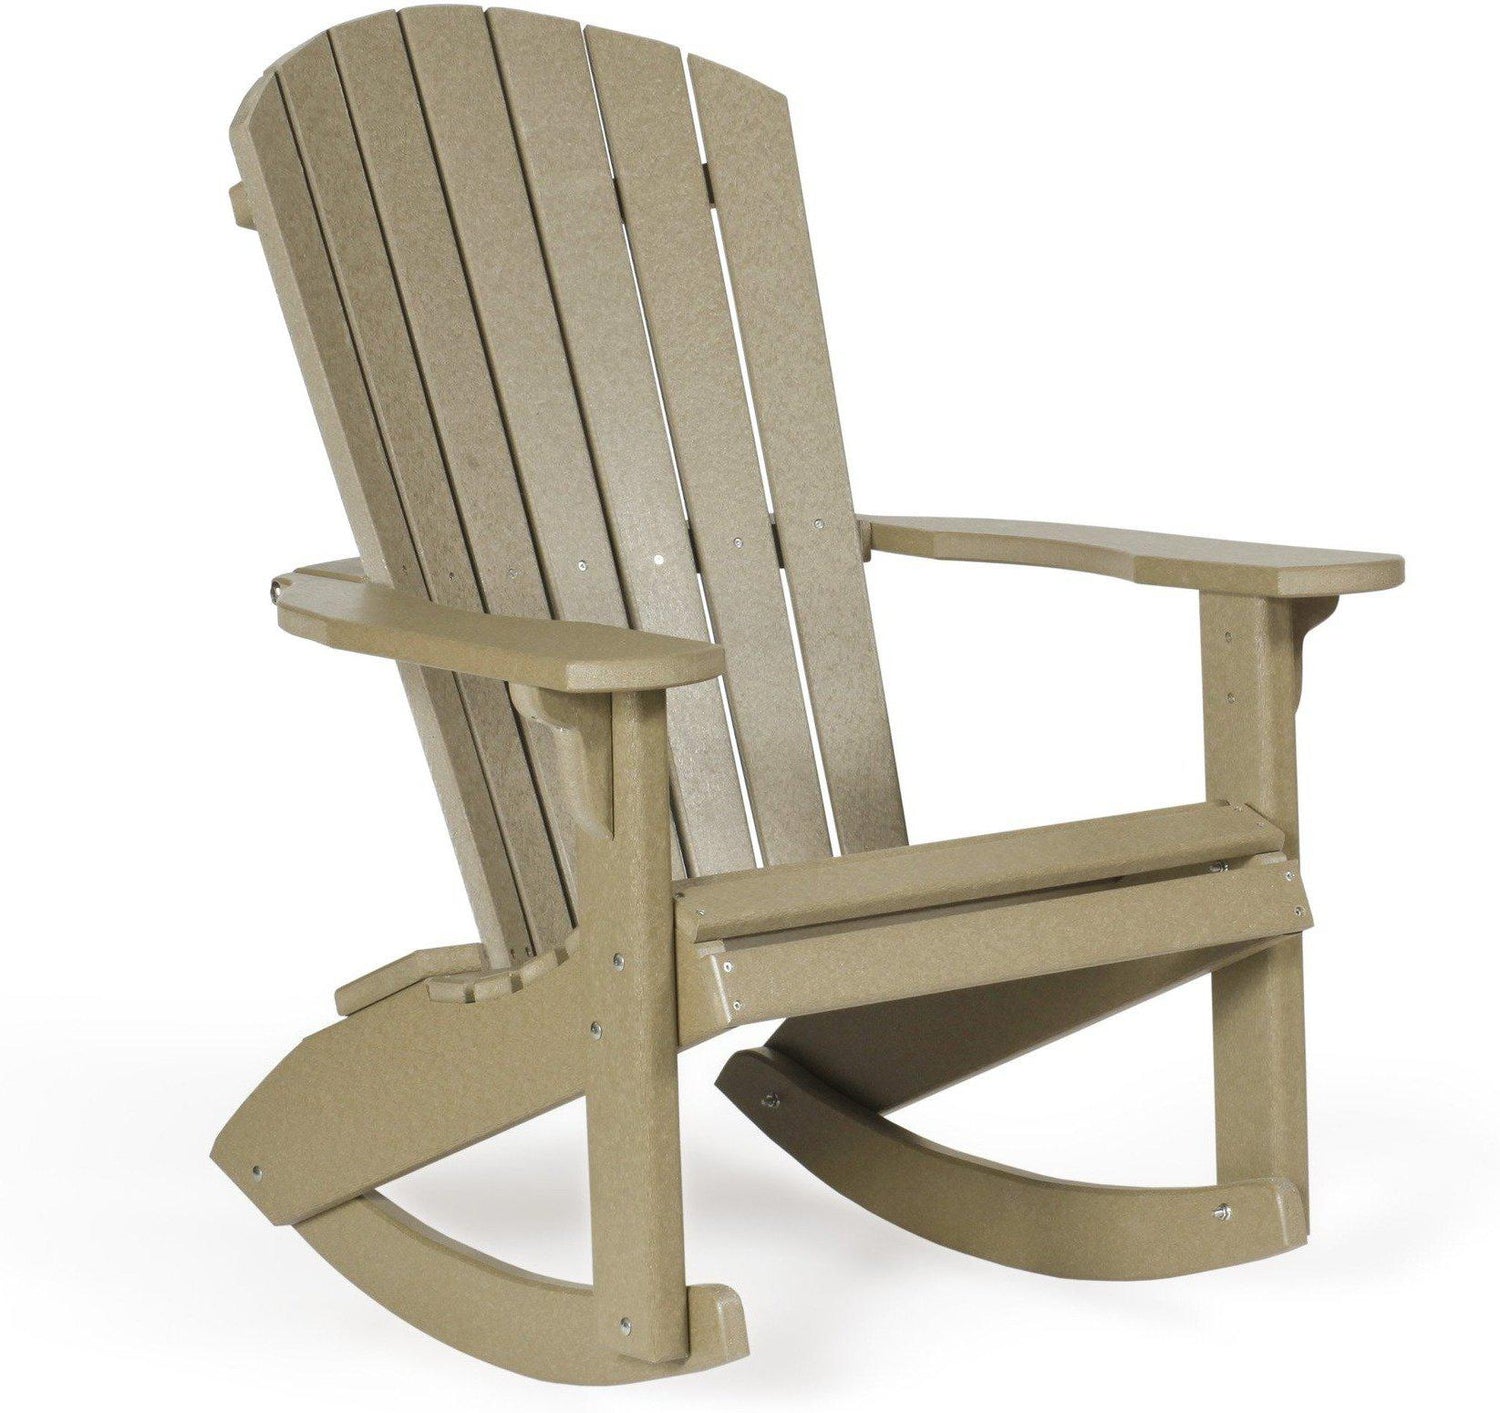 Leisure Lawns Outdoor Amish Made Rocking Chair Collection